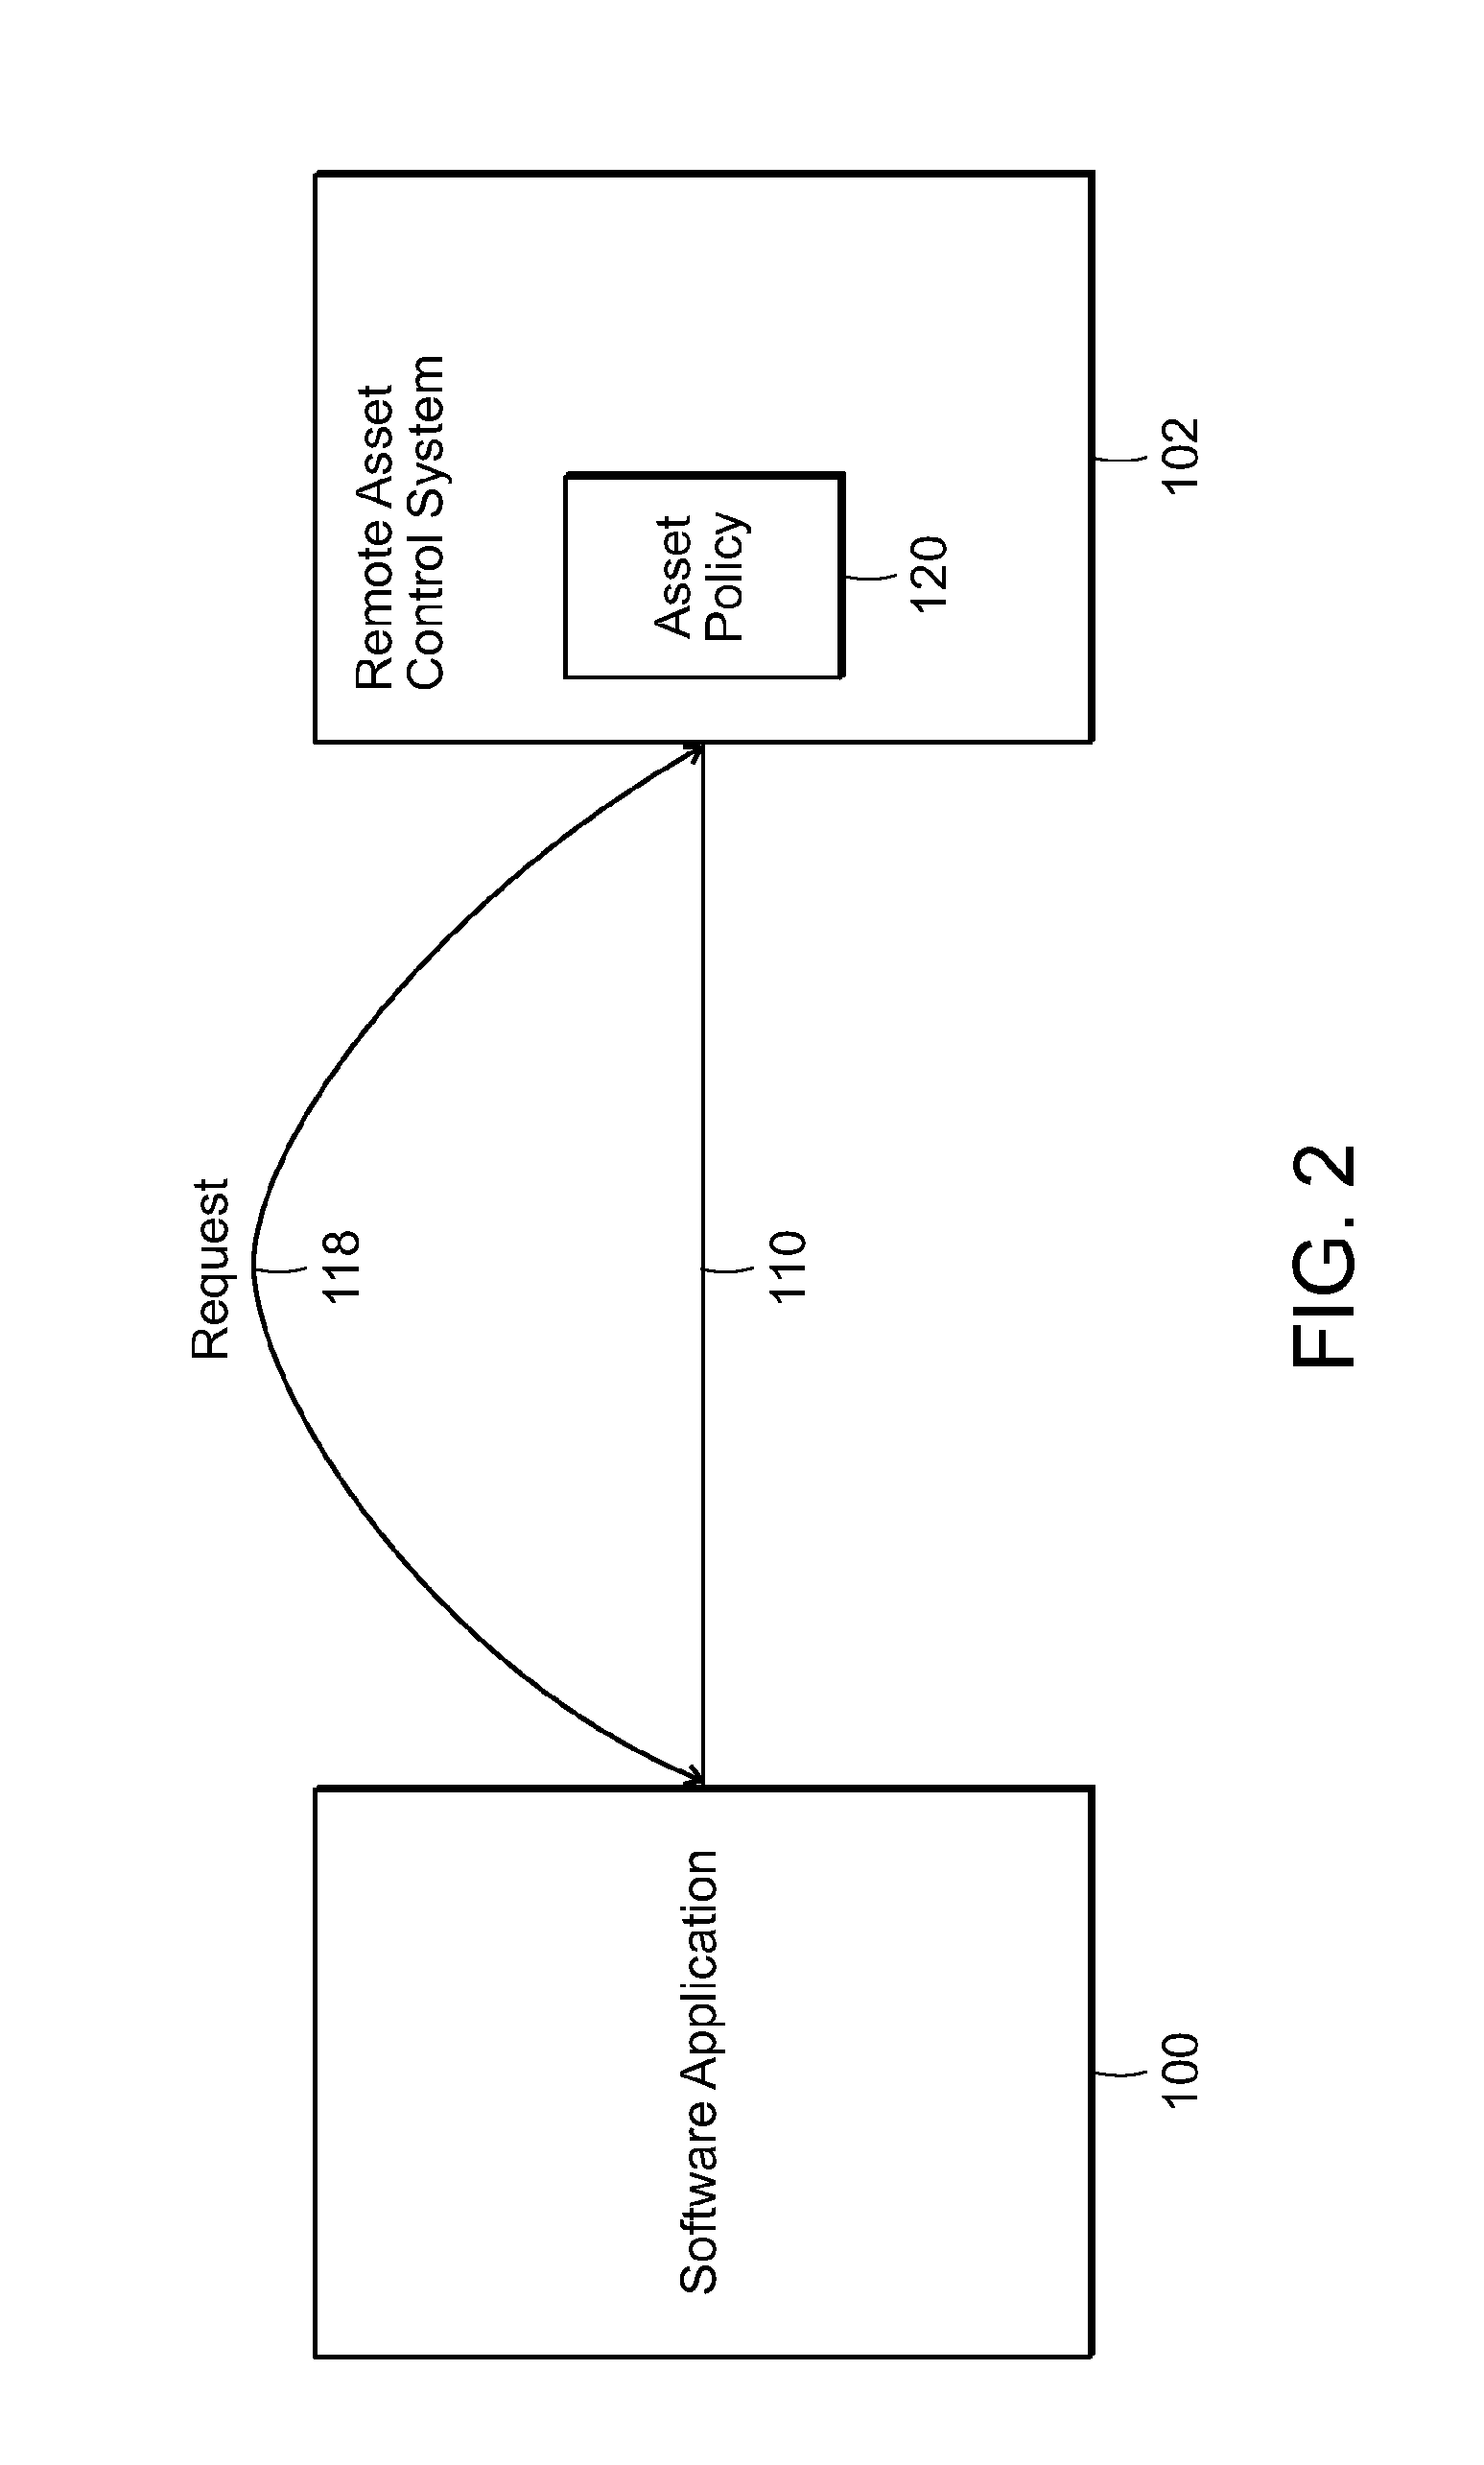 Remote asset control systems and methods